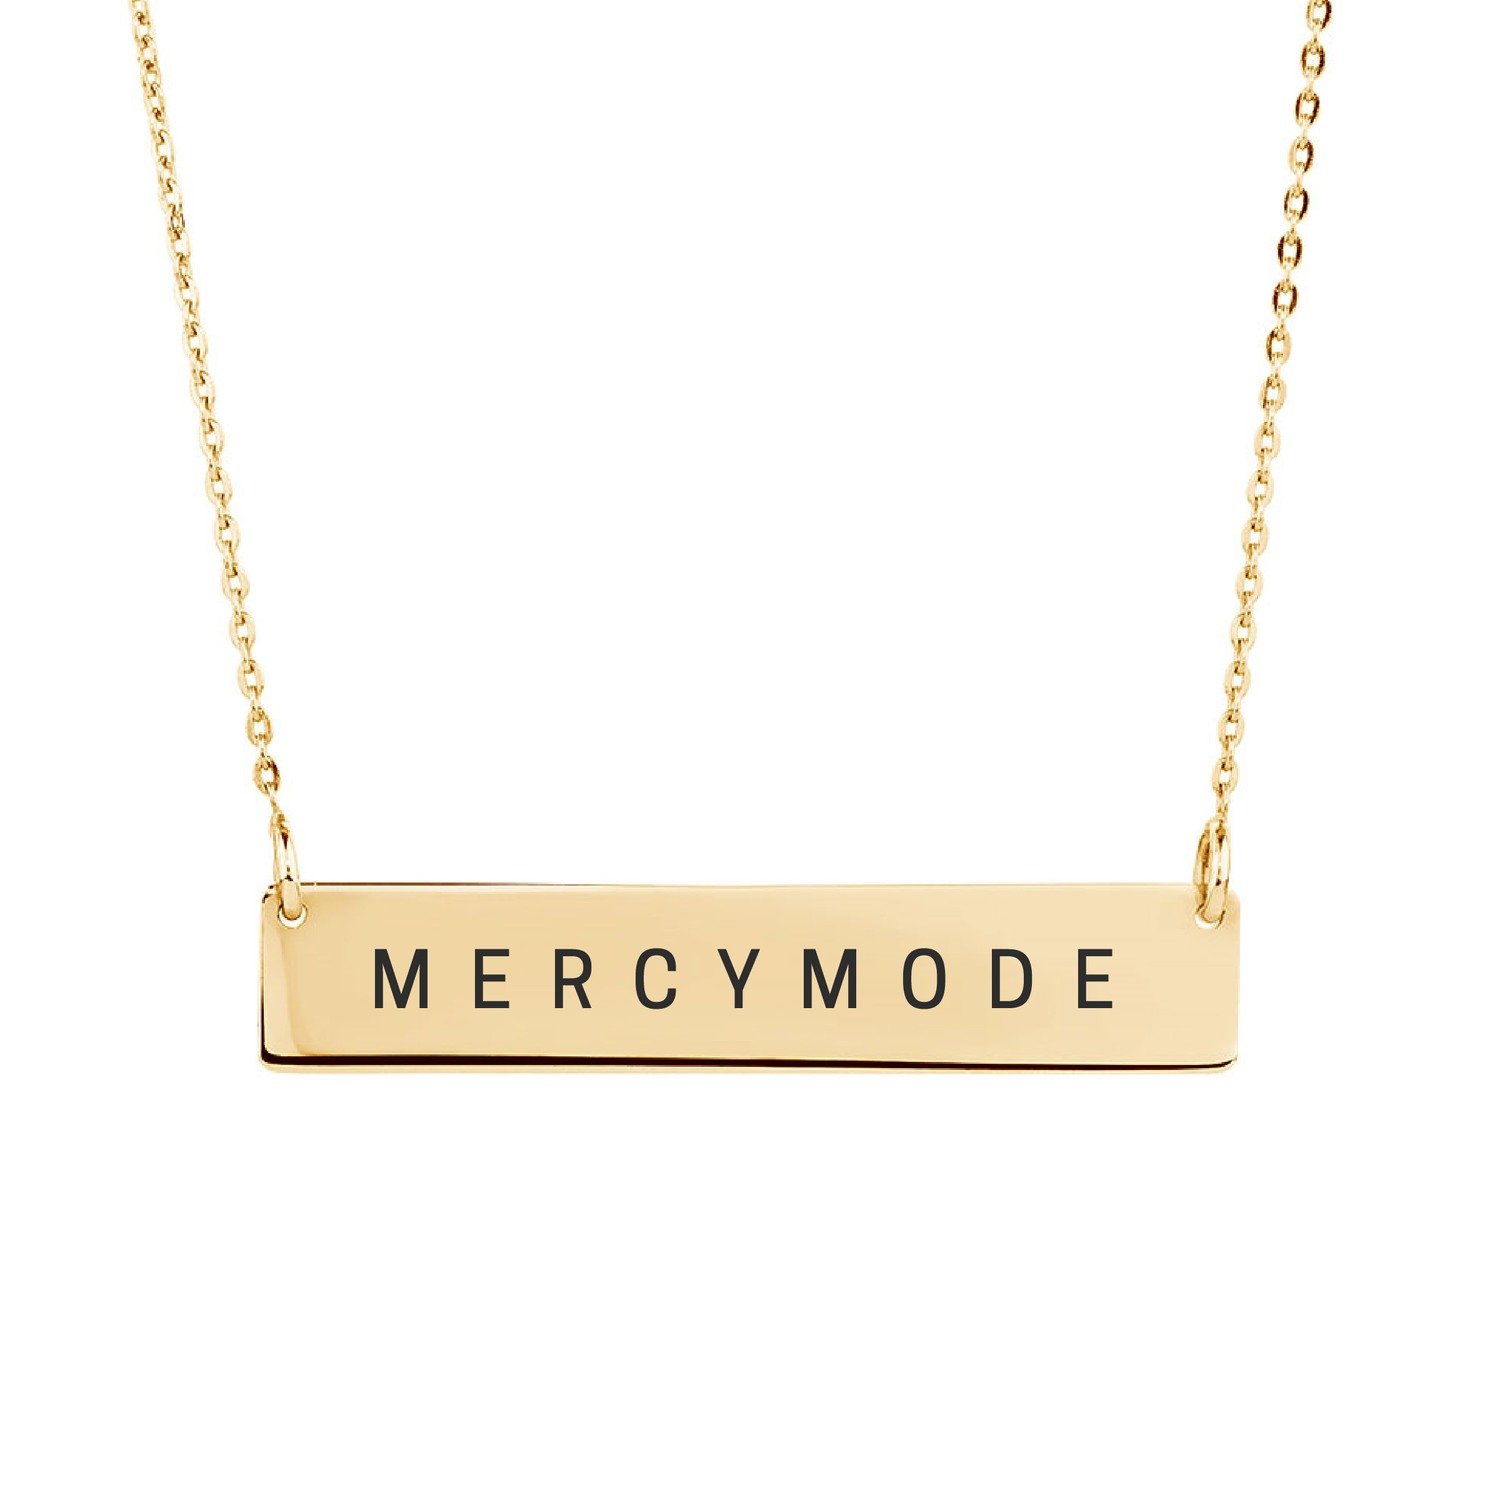 Mercy Mode Necklace